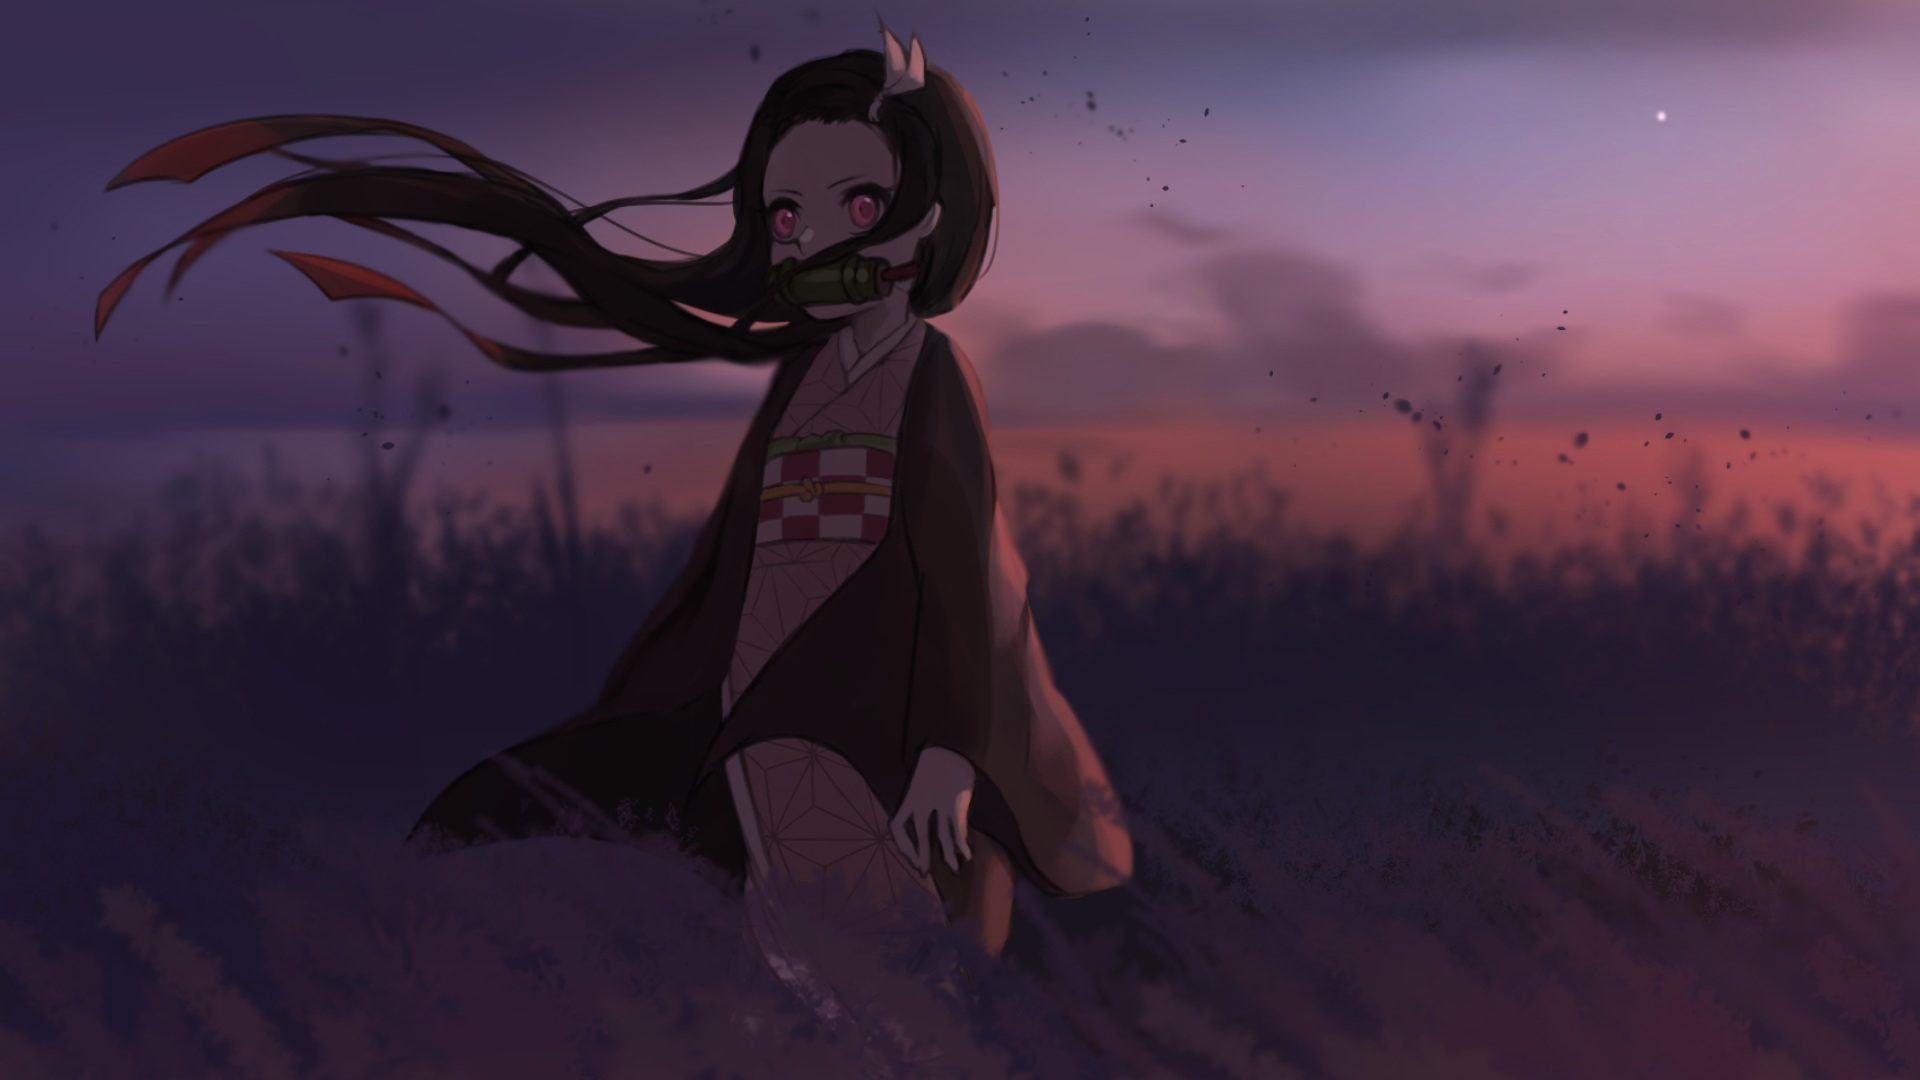 Demon Slayer Nezuko Kamado Standing On Field With Shallow Wallpaper Of Sky And Clouds 2K Anime